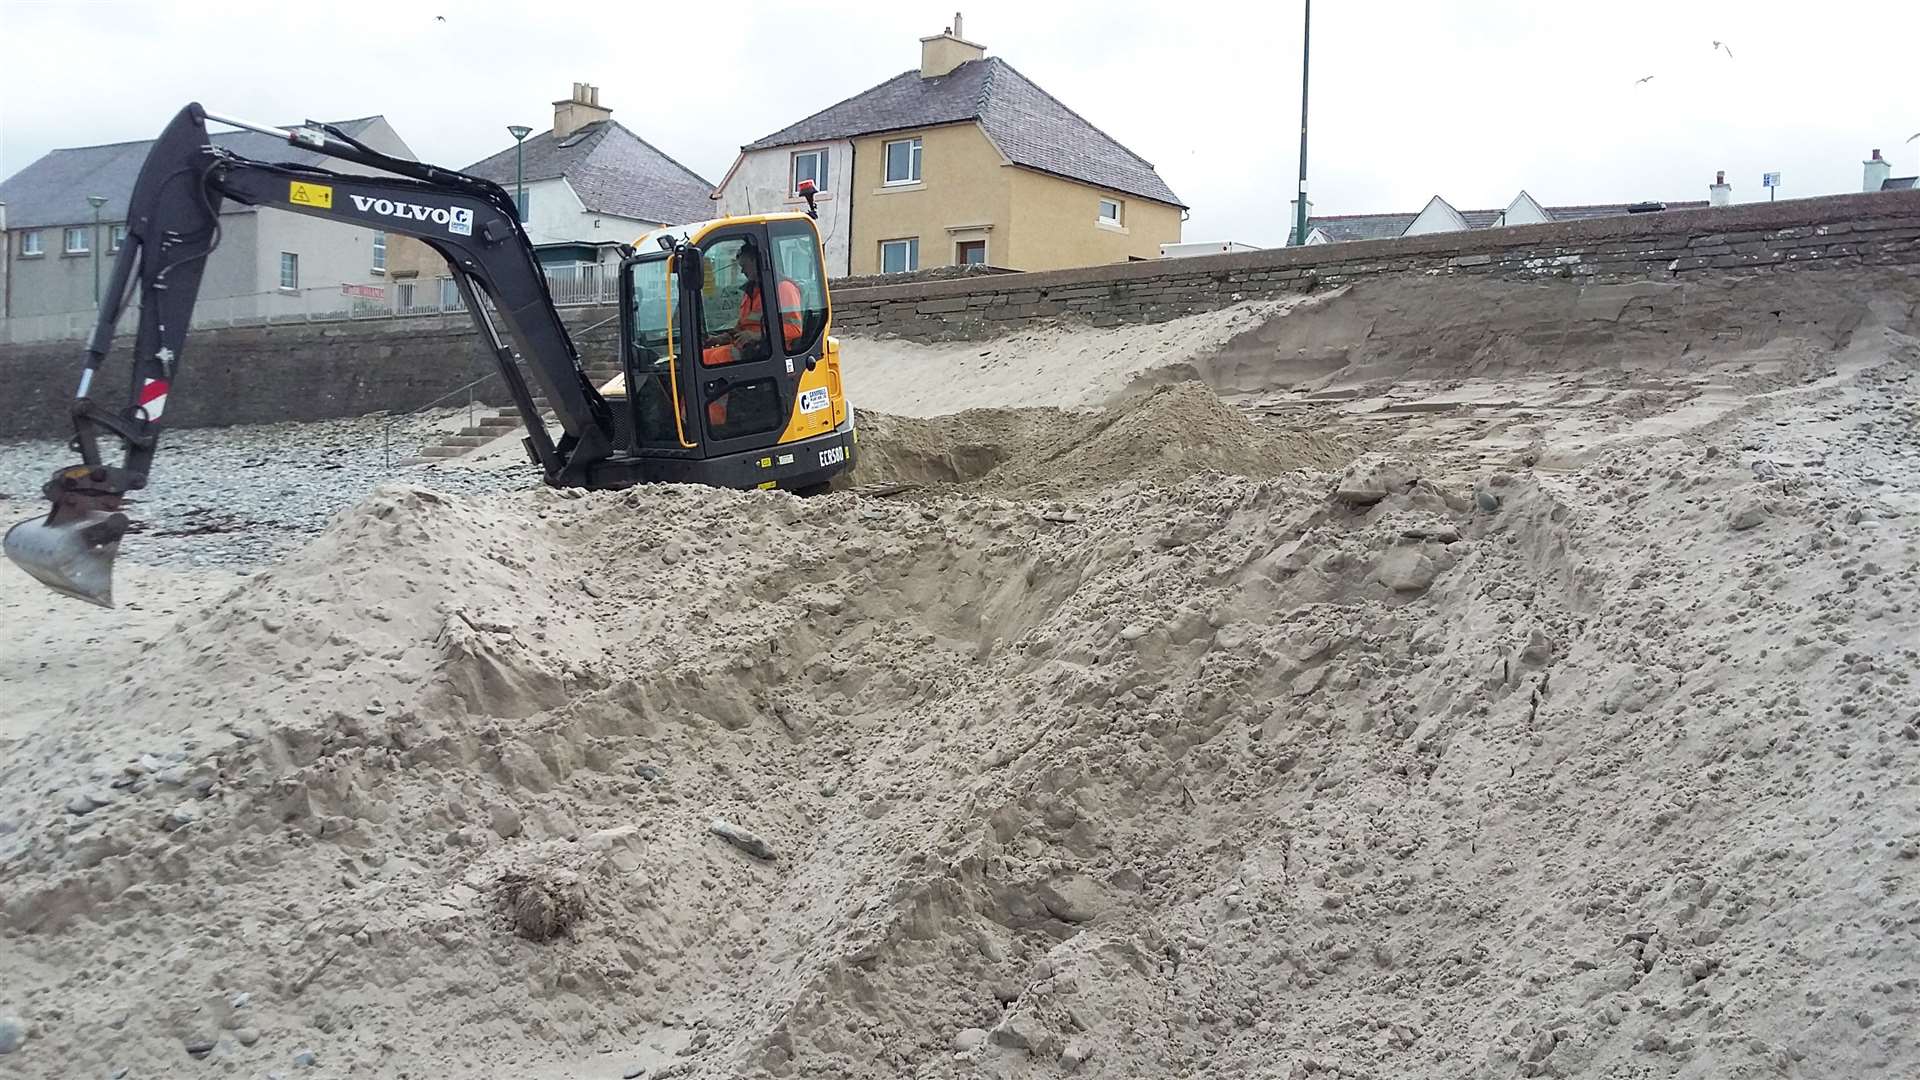 Work taking place on Thursday to clear sand at the Esplanade area of Thurso (picture courtesy of Matthew Reiss).